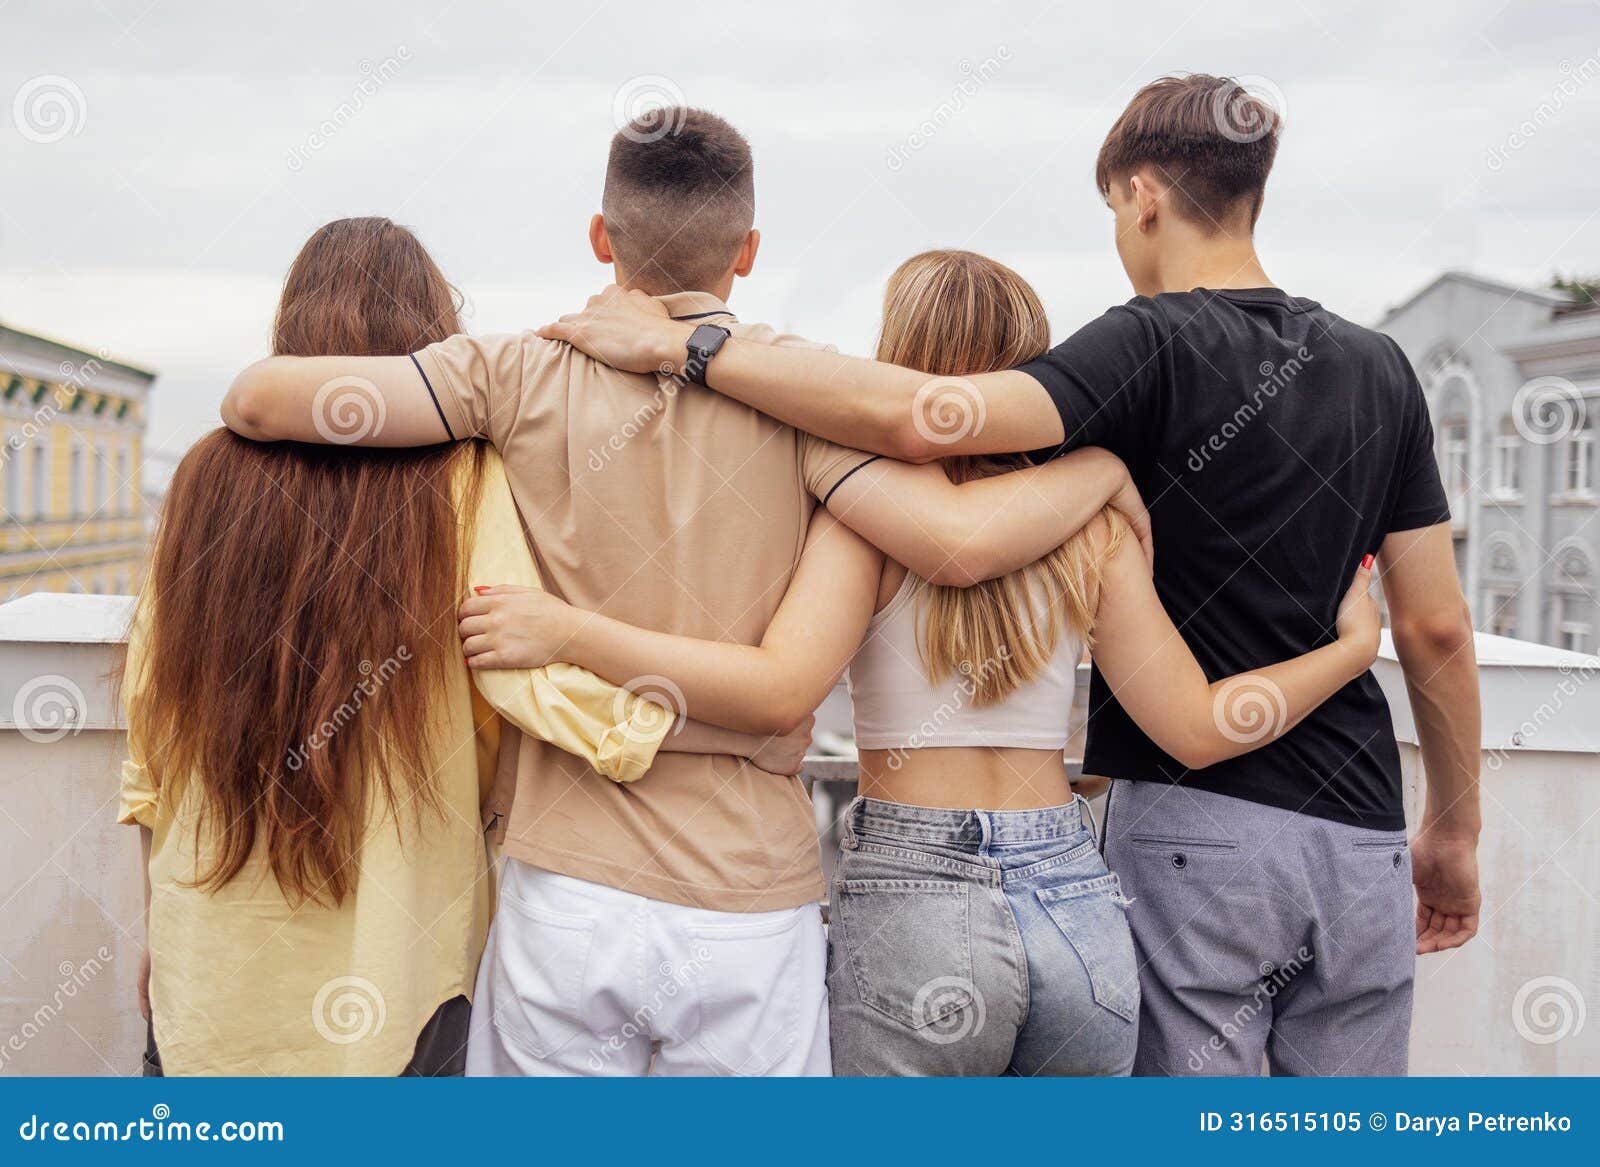 four teenagers hug and stand with their backs on the roof of the house. friends have a great time together